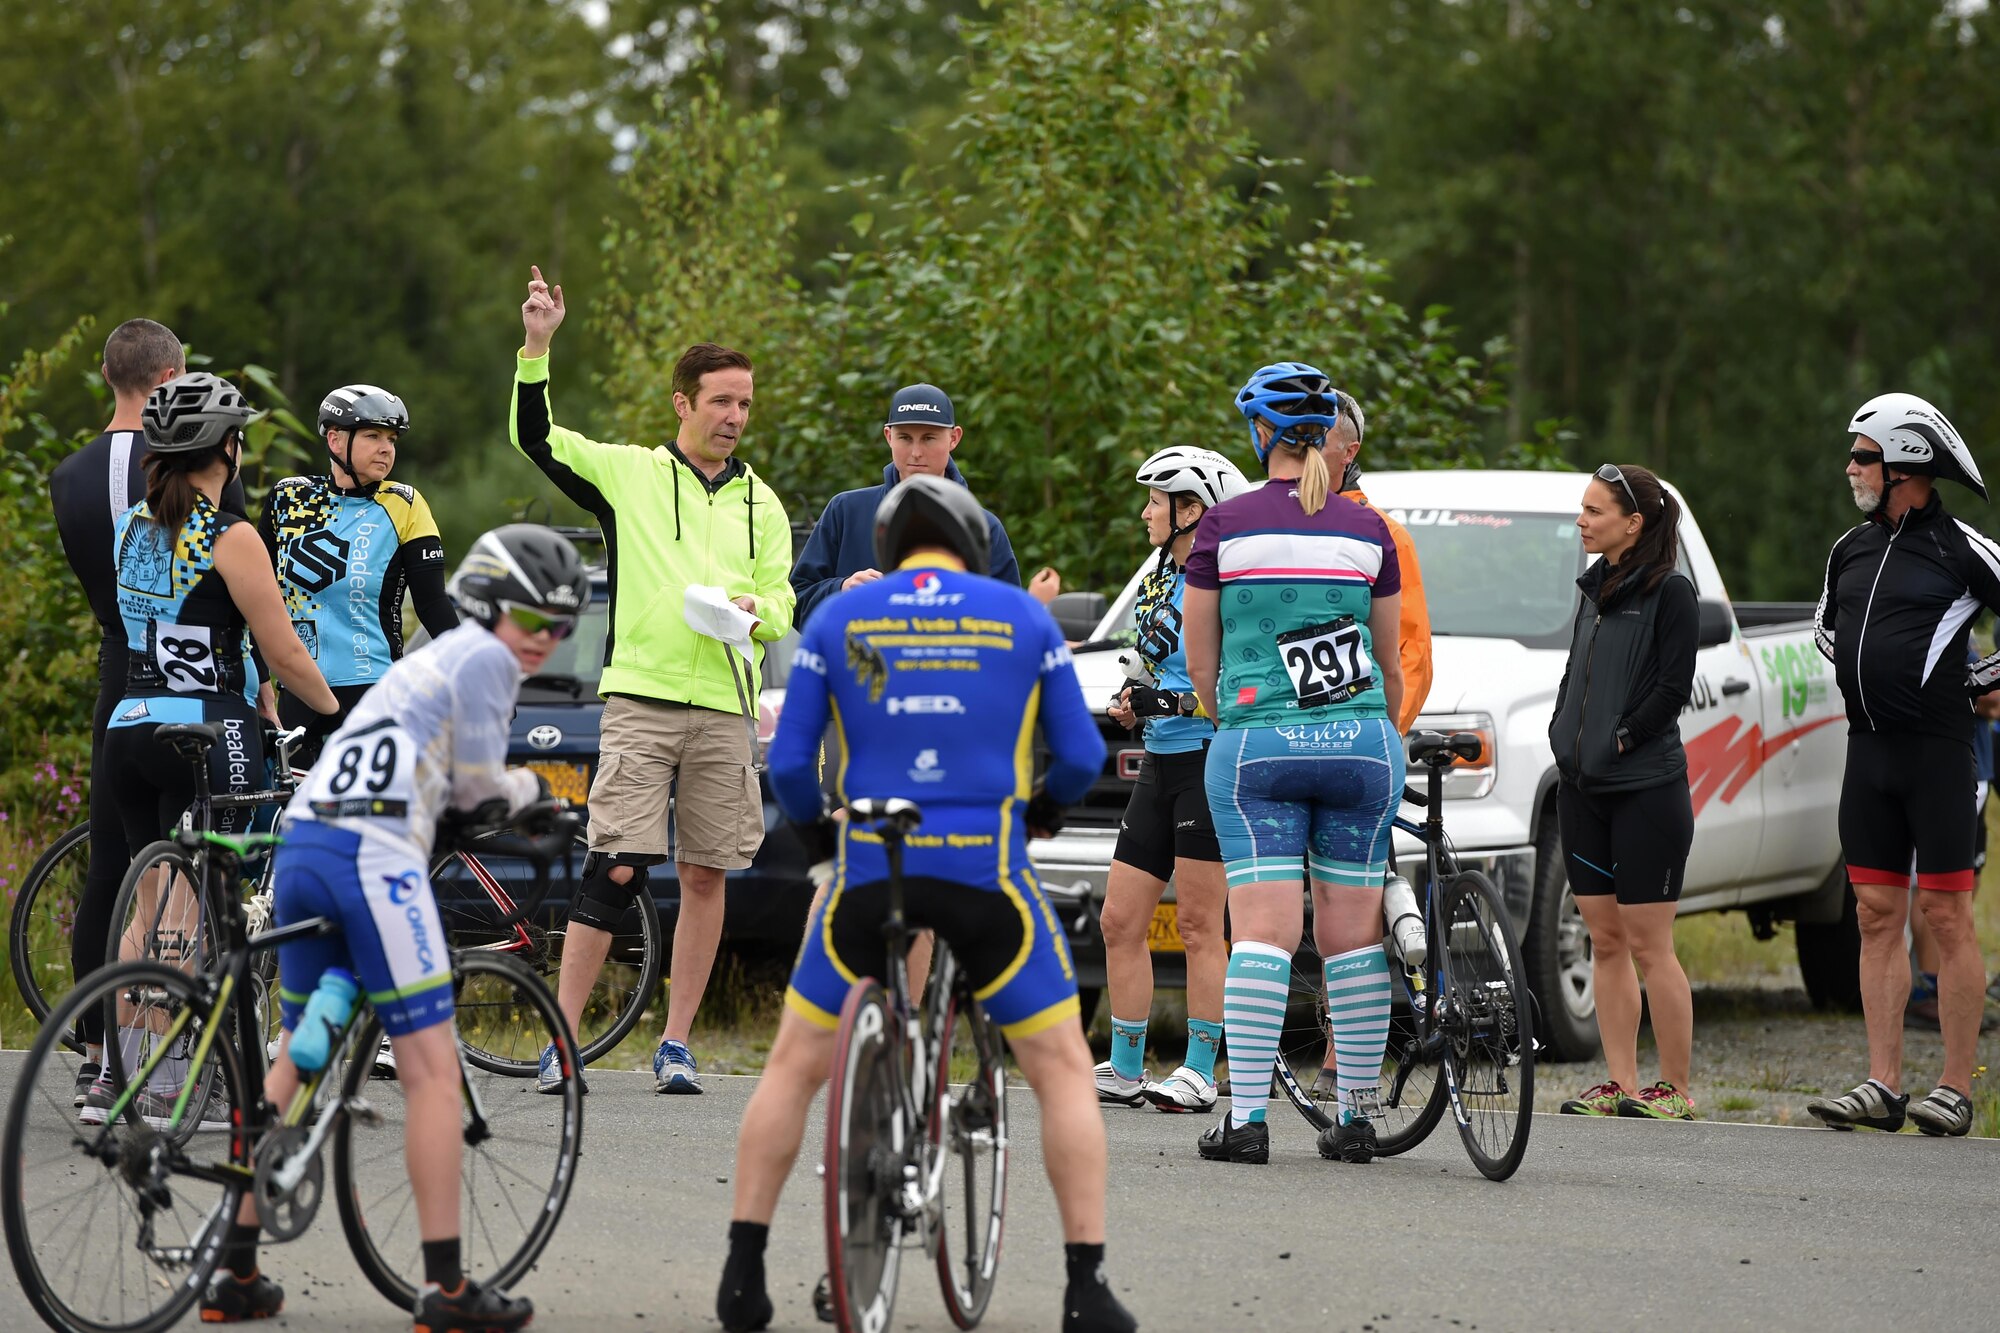 Cyclists receive a briefing before the Moose Run time-trial race at Moose Run Golf Course at Joint Base Elmendorf-Richardson, Alaska, Aug. 3, 2017. For more than 15 years, the club has hosted road race events at JBER.